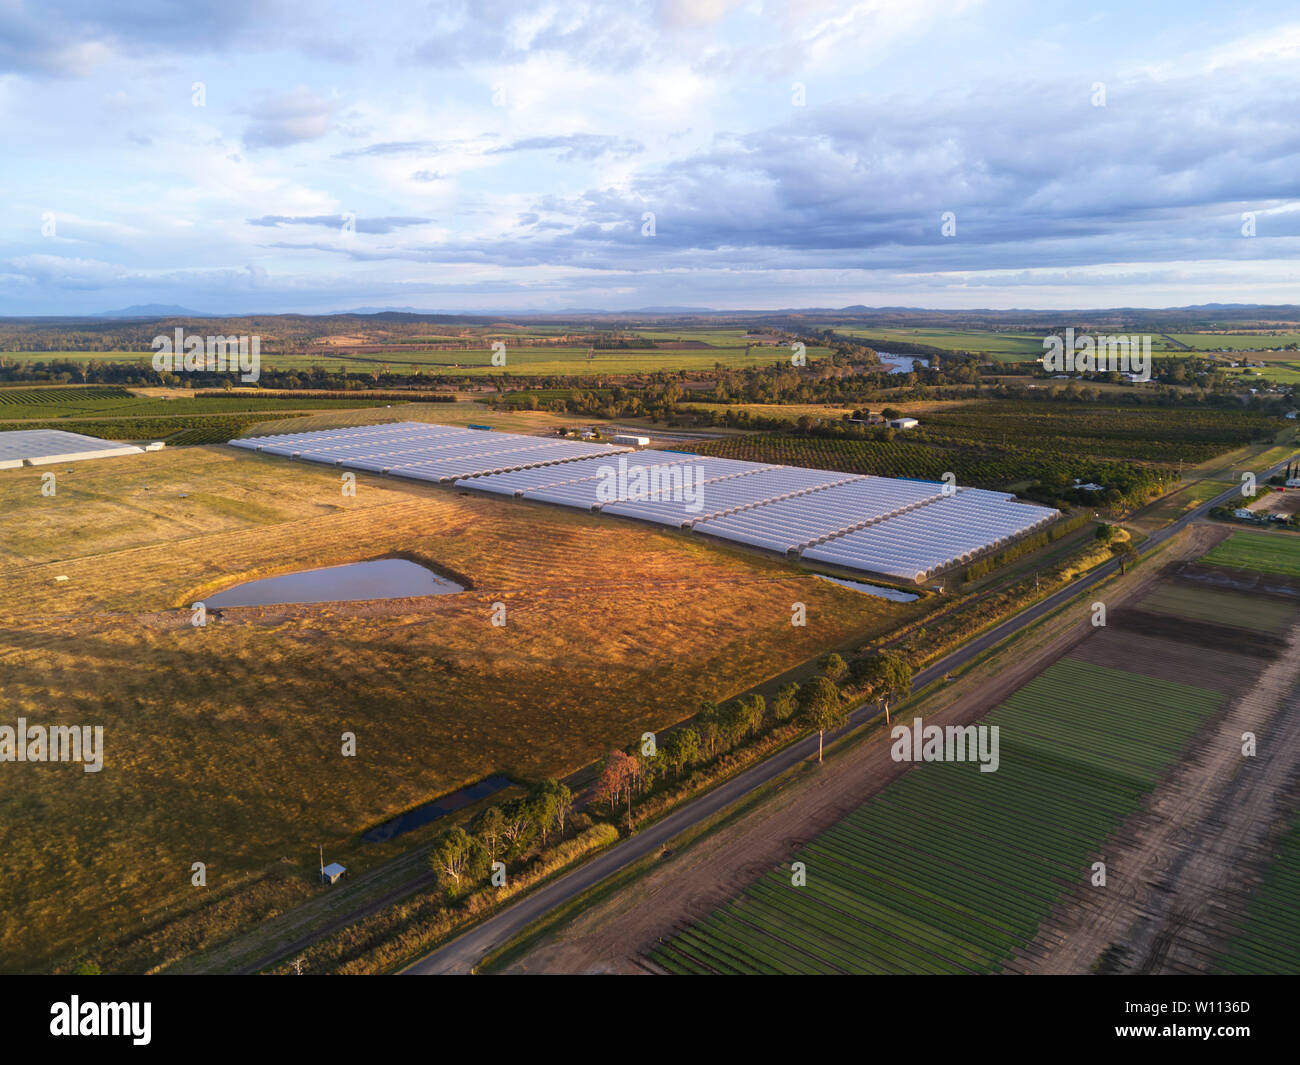 Aerial of hydroponic blueberry farm grown under plastic tunnels at sunset near Wallaville Queensland Australia Stock Photo